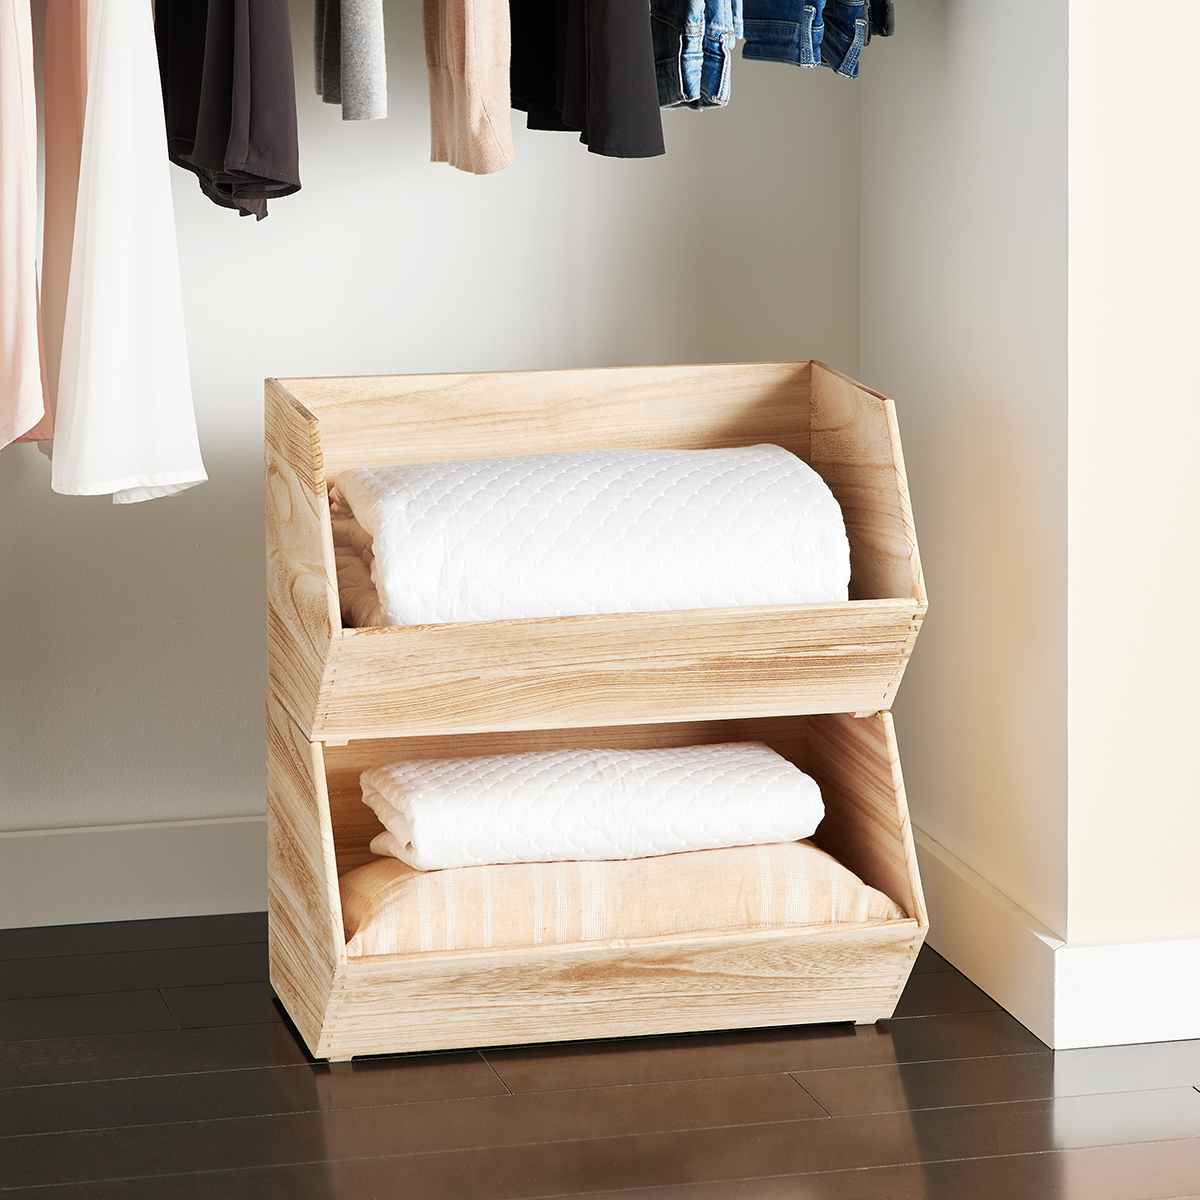 https://www.containerstore.com/catalogimages/498550/10093084-extra-large-stackable-wood-.jpg